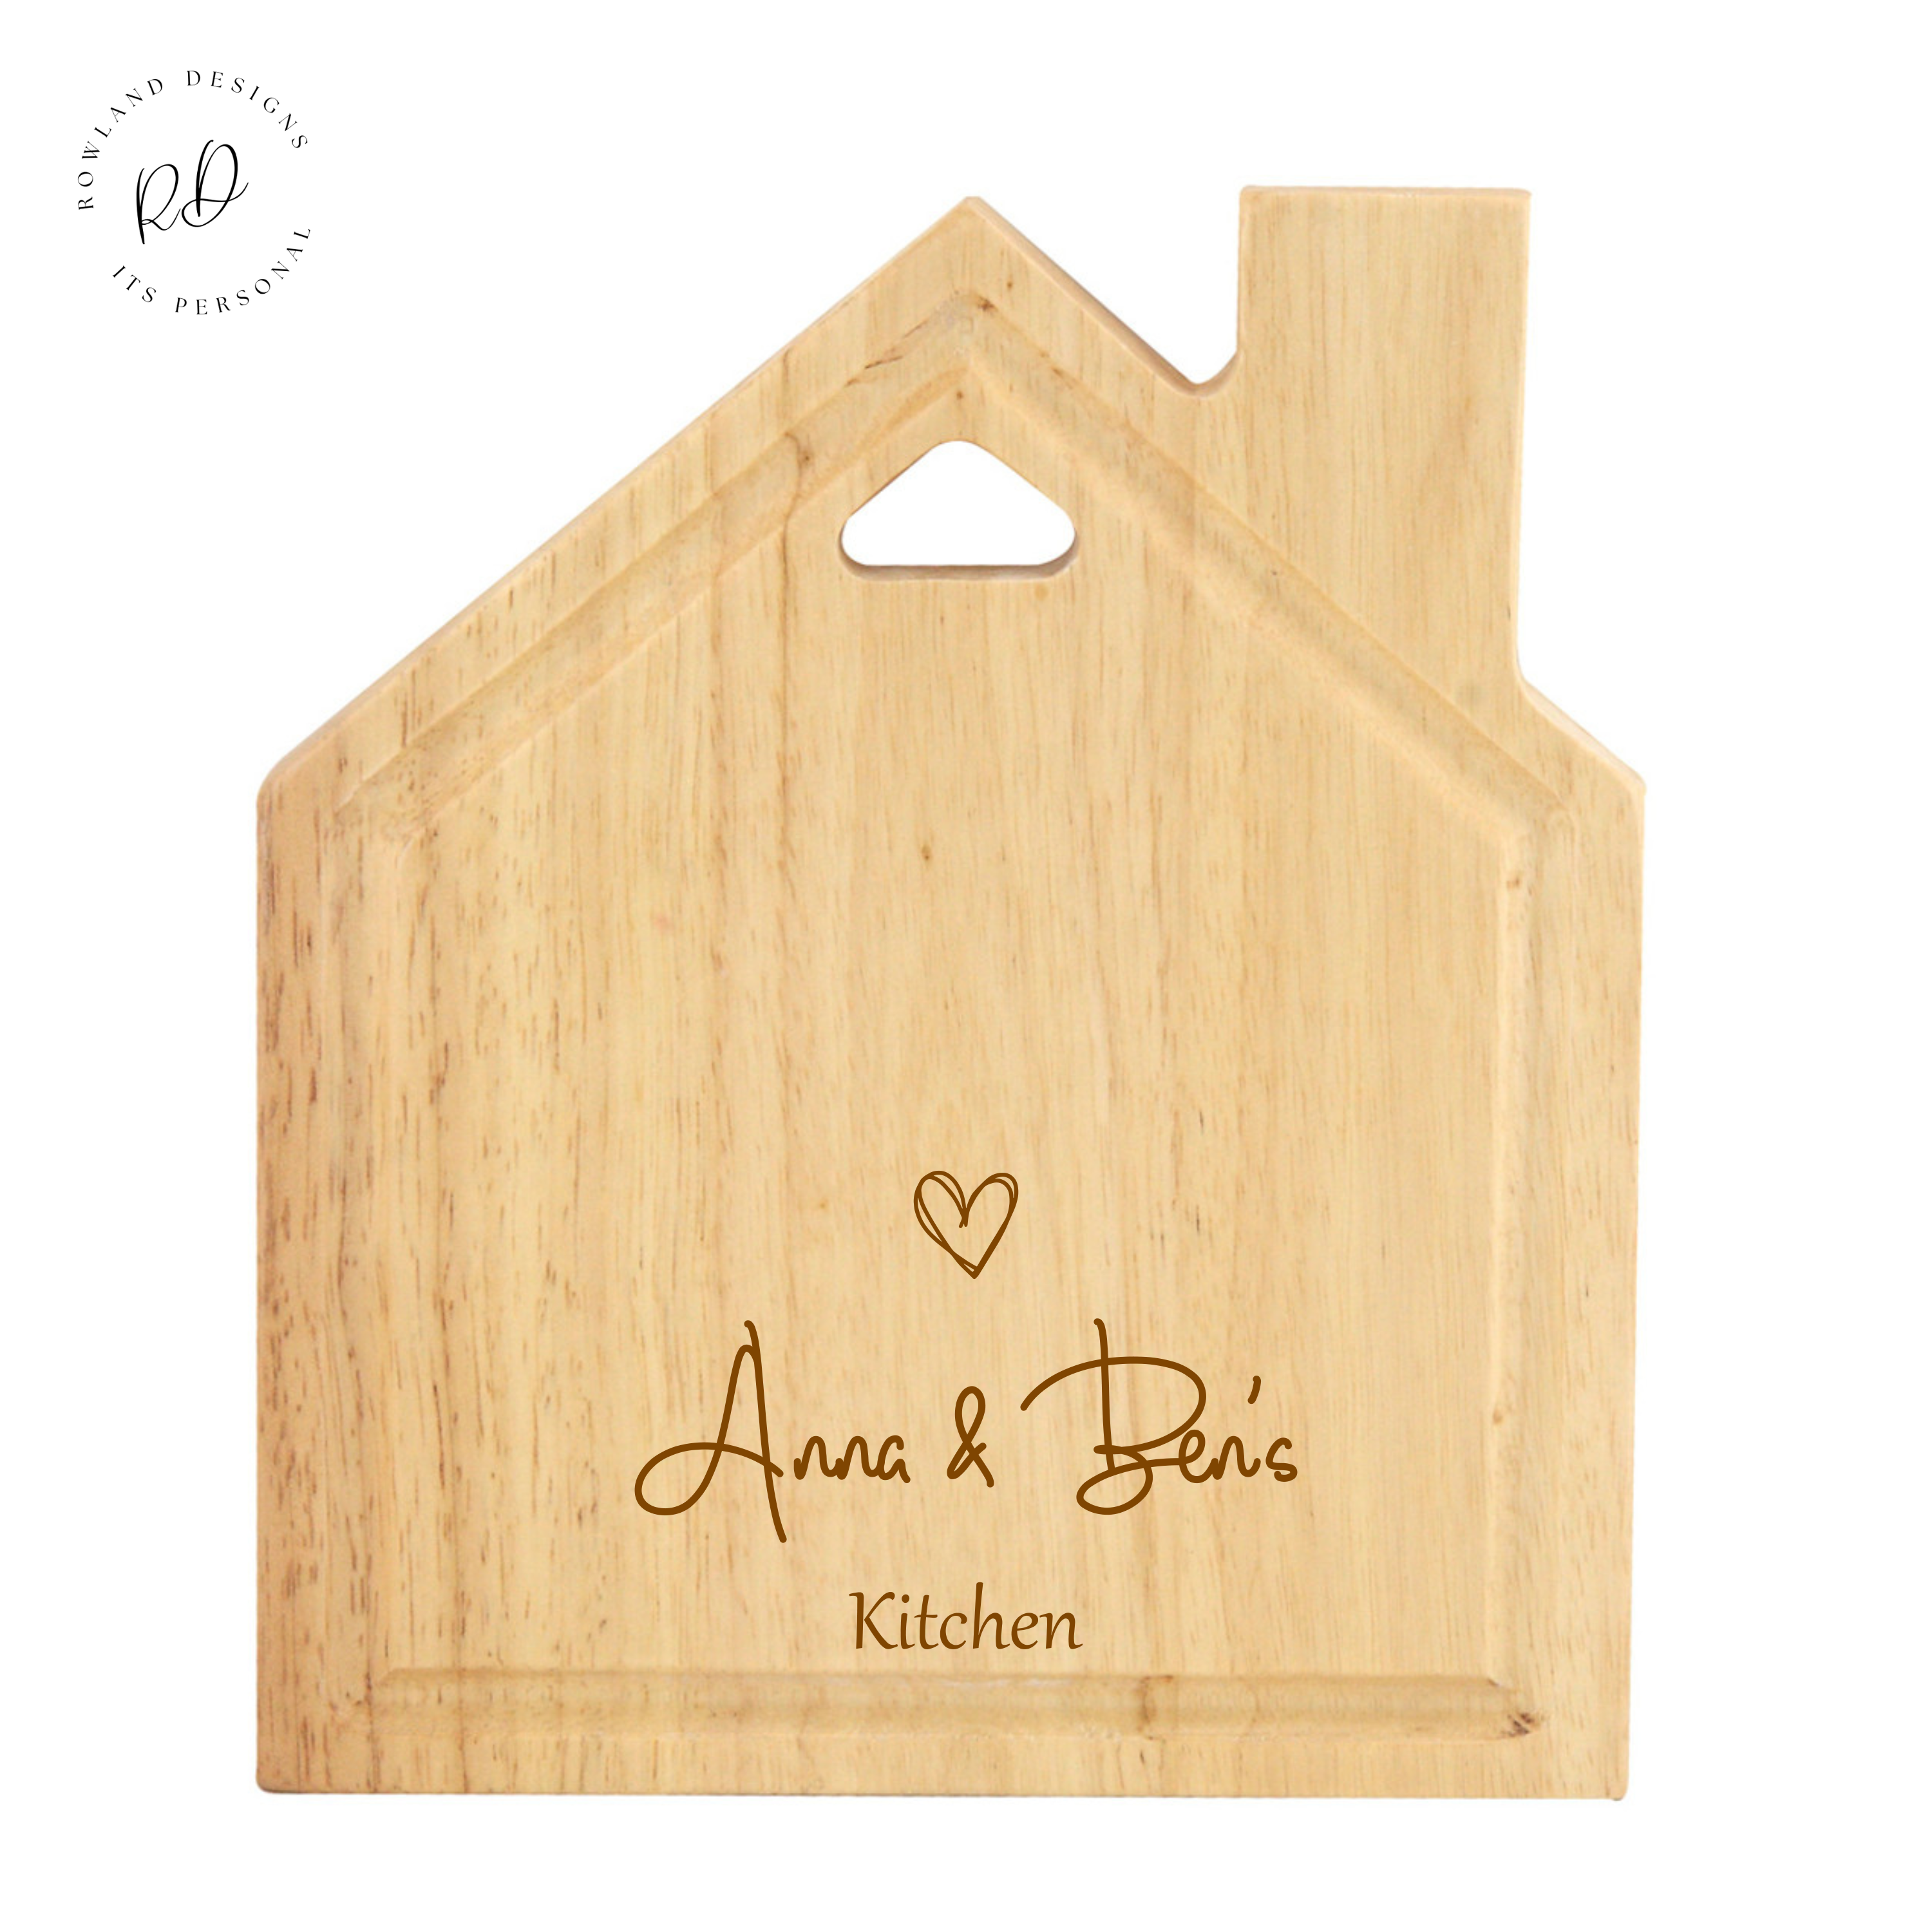 Personalised House Chopping Board: Custom engraved with heart motif and customizable text. Perfect for any occasion, from weddings to housewarmings.